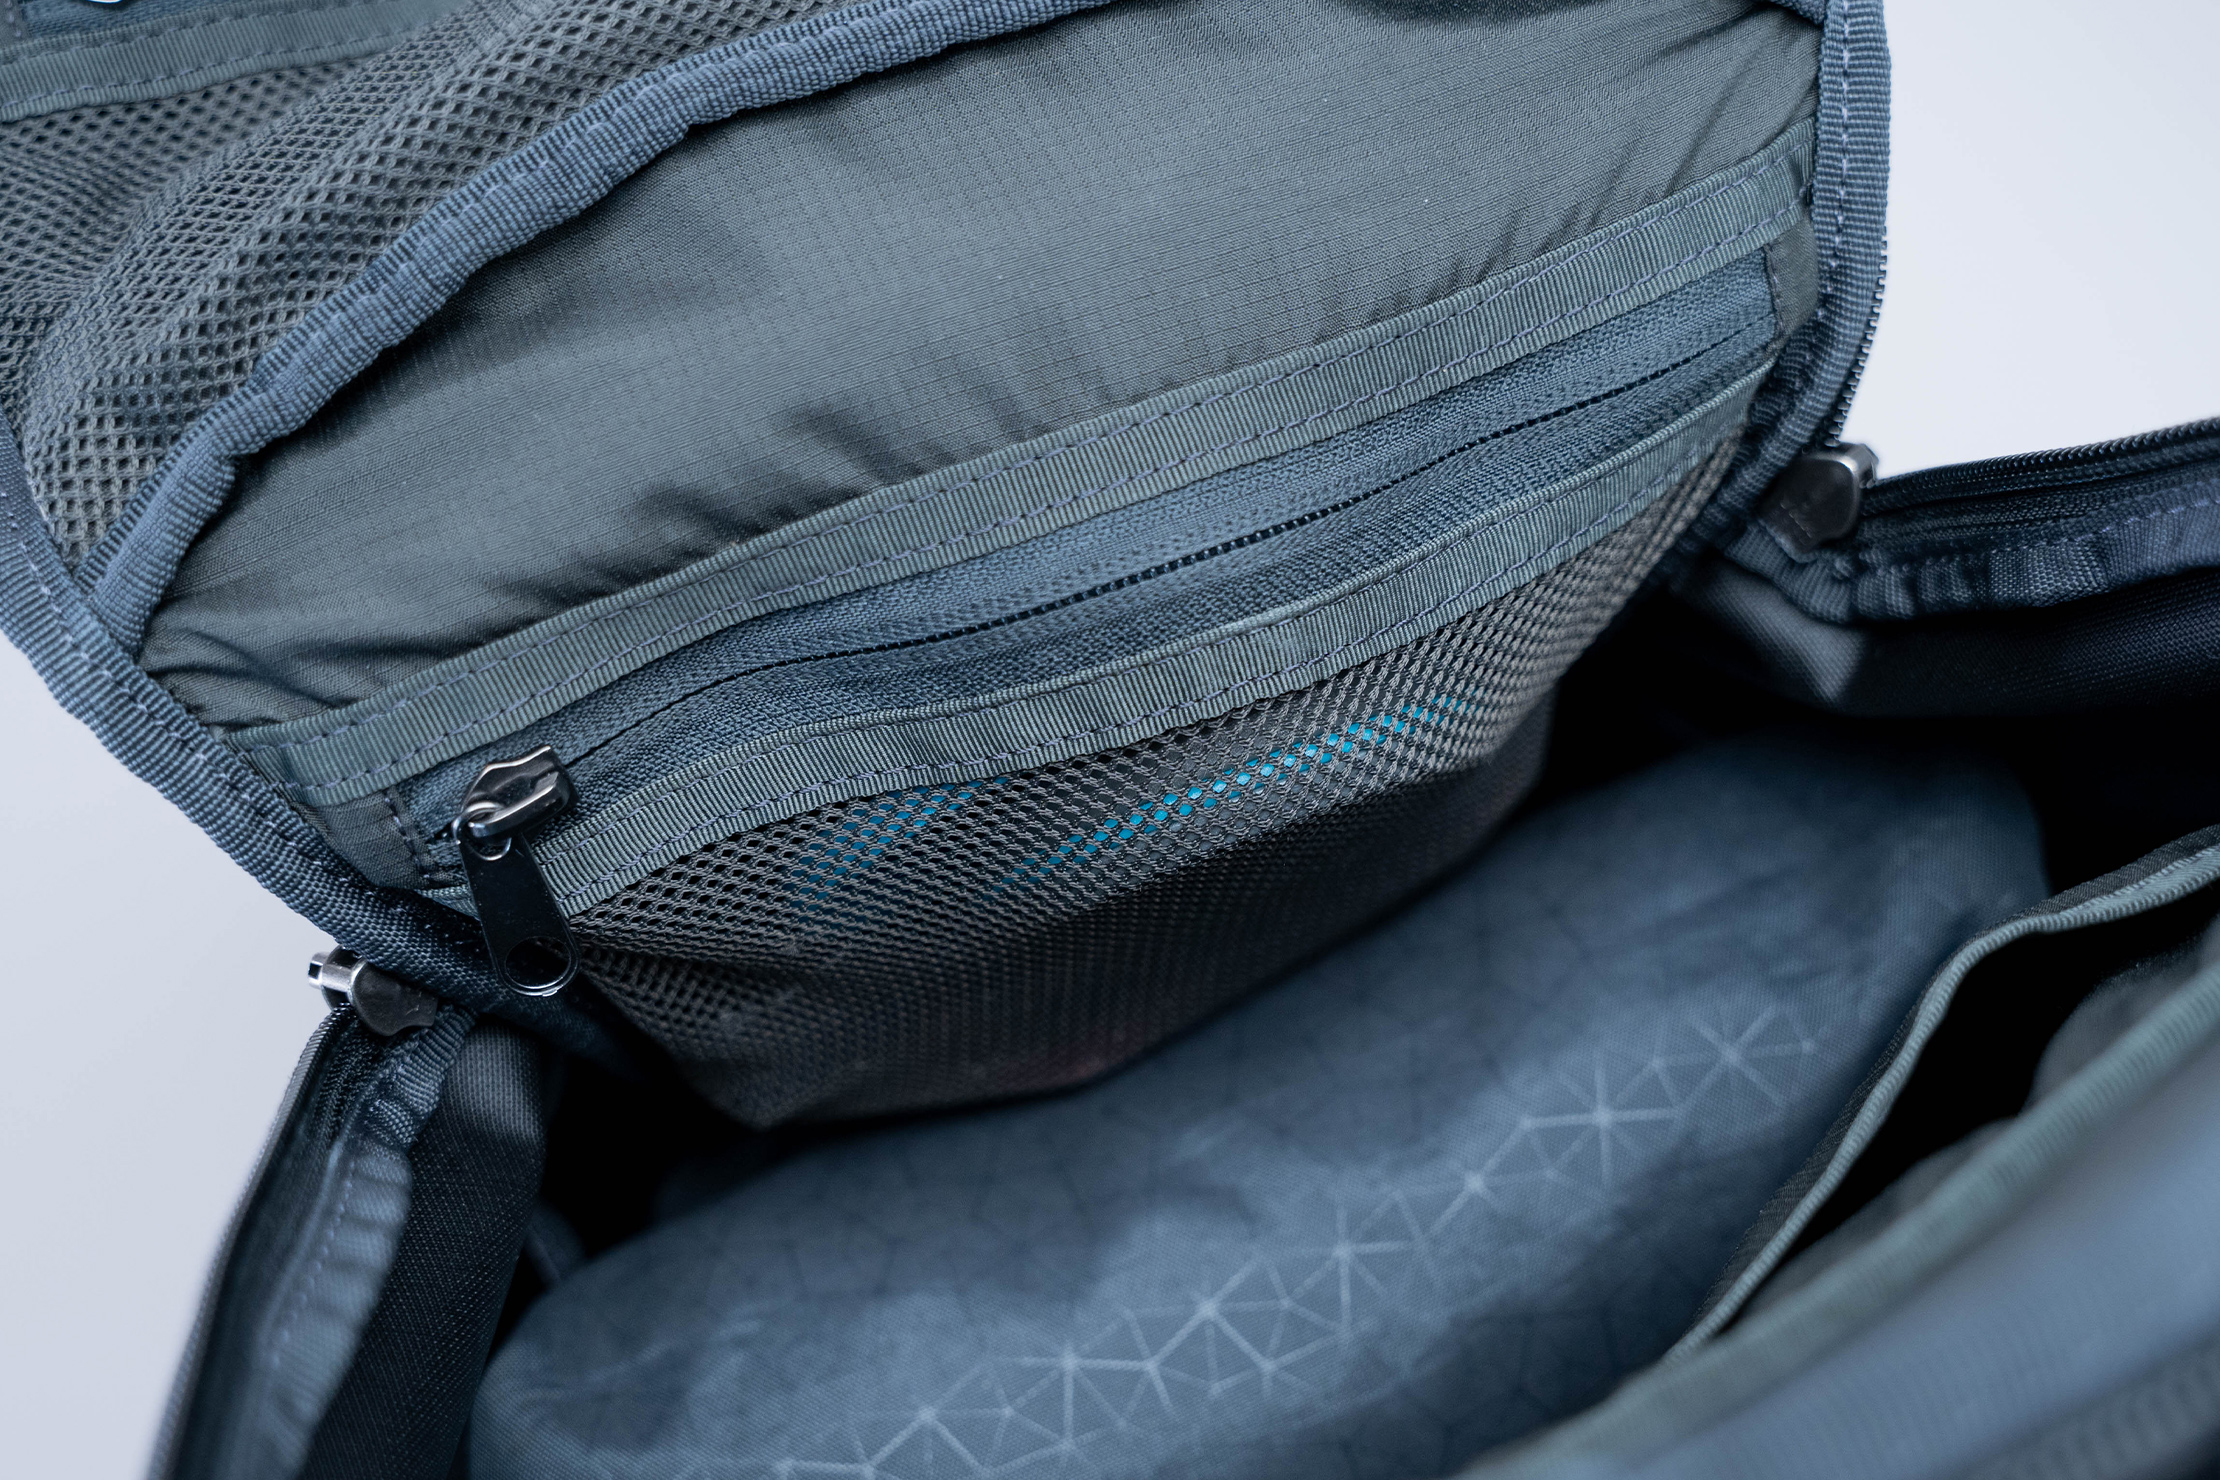 Thule EnRoute 14L Backpack Interior